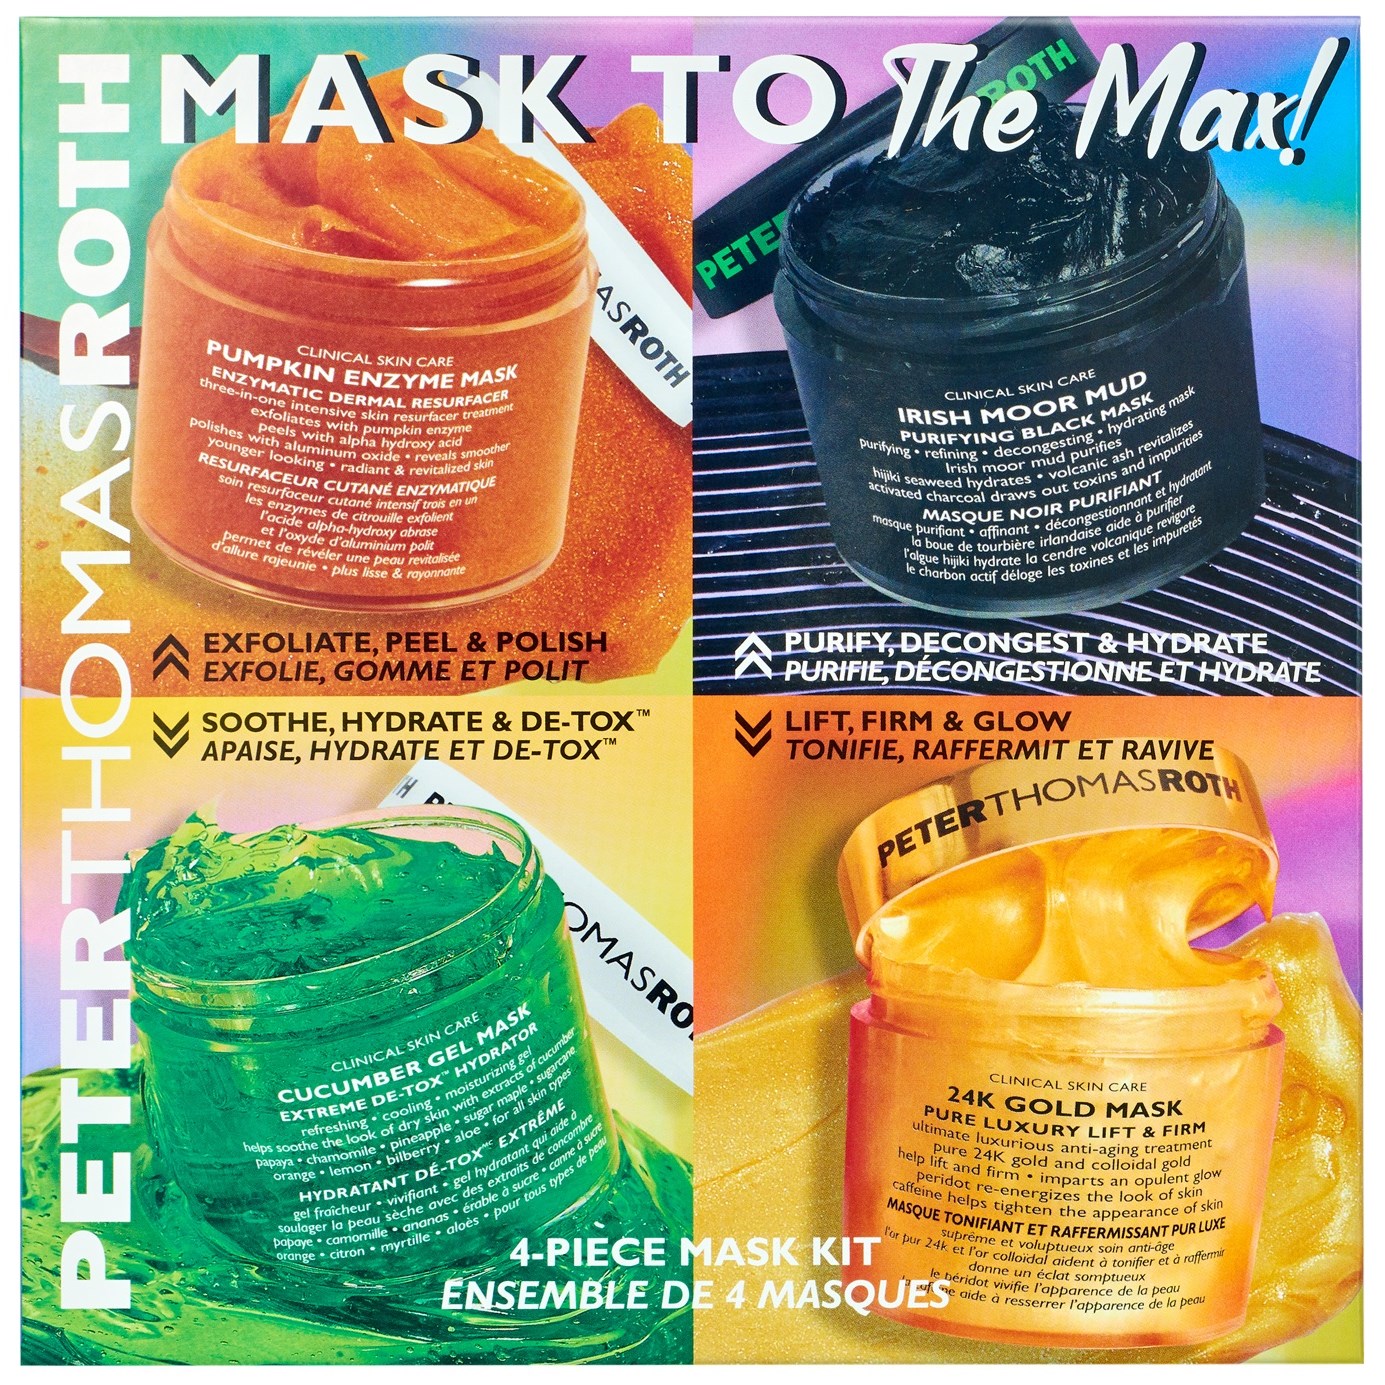 Läs mer om Peter Thomas Roth Mask to the Max! 4-piece Mask Kit